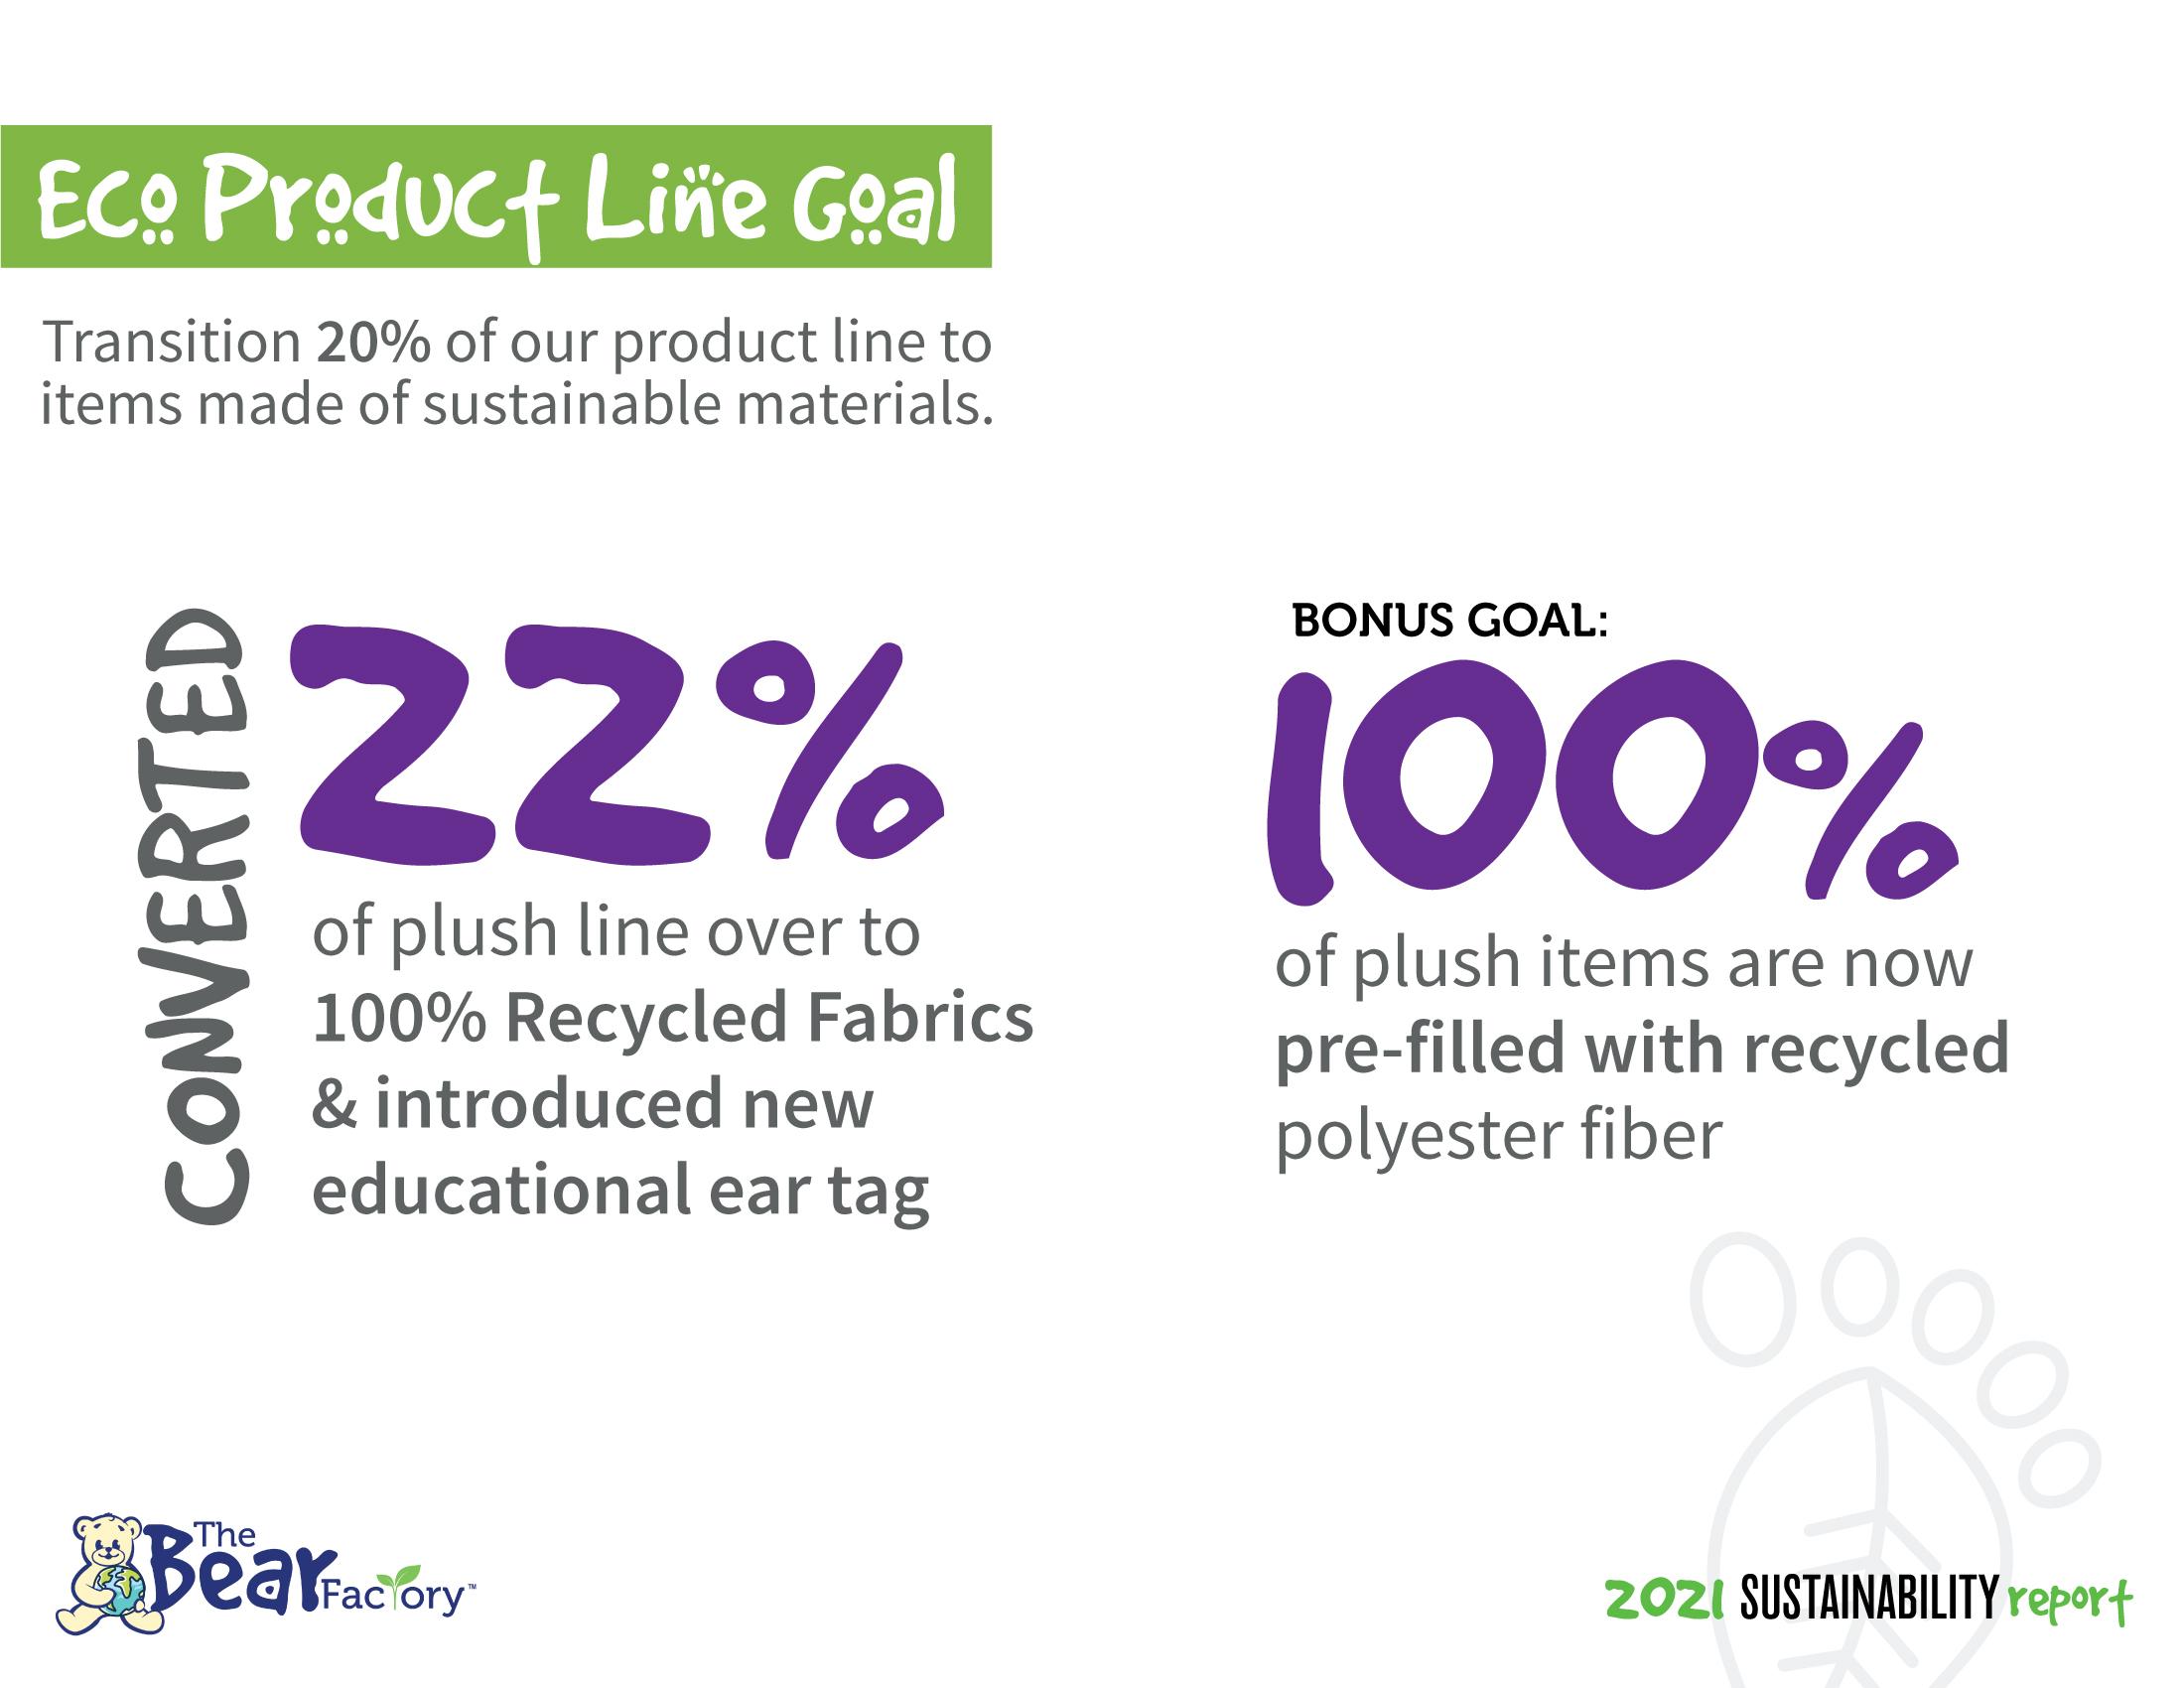 Eco Product Line Goal - Transition 20% of our product line to items made of sustainable materials. Converted 22% of plush line over to 100% recycled fabrics and introduced new education ear tag. Bonus goal:100% of plush items are now pre-filled with recycled ployester fiber.